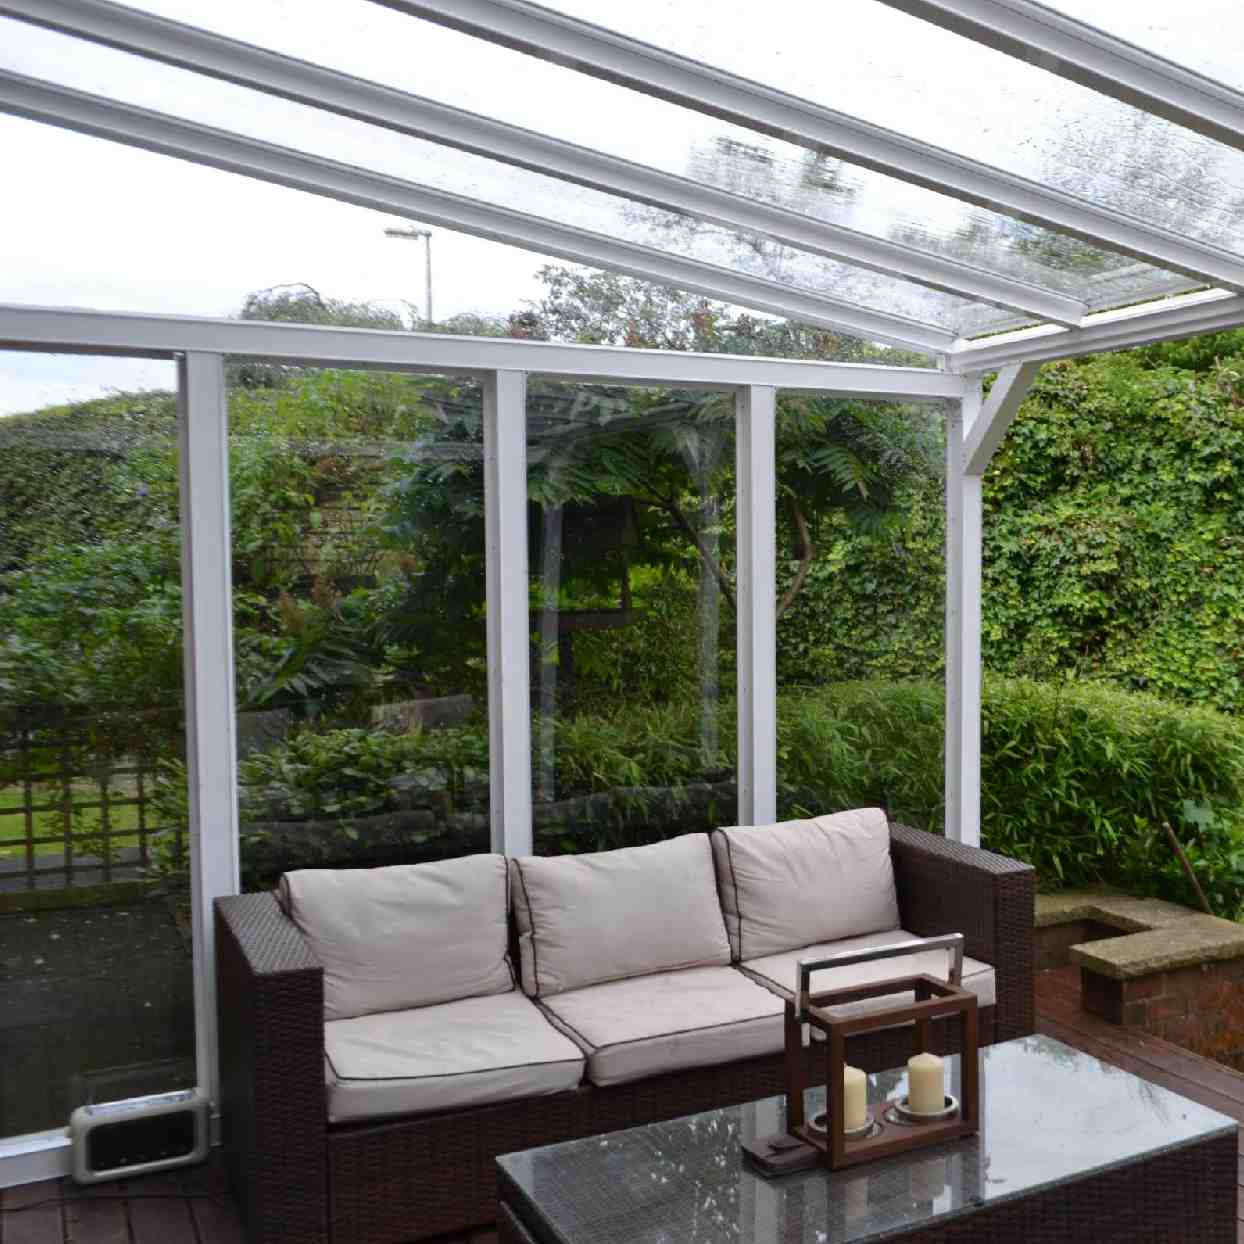 Buy Omega Verandah White with 16mm Polycarbonate Glazing - 6.0m (W) x 1.5m (P), (3) Supporting Posts online today